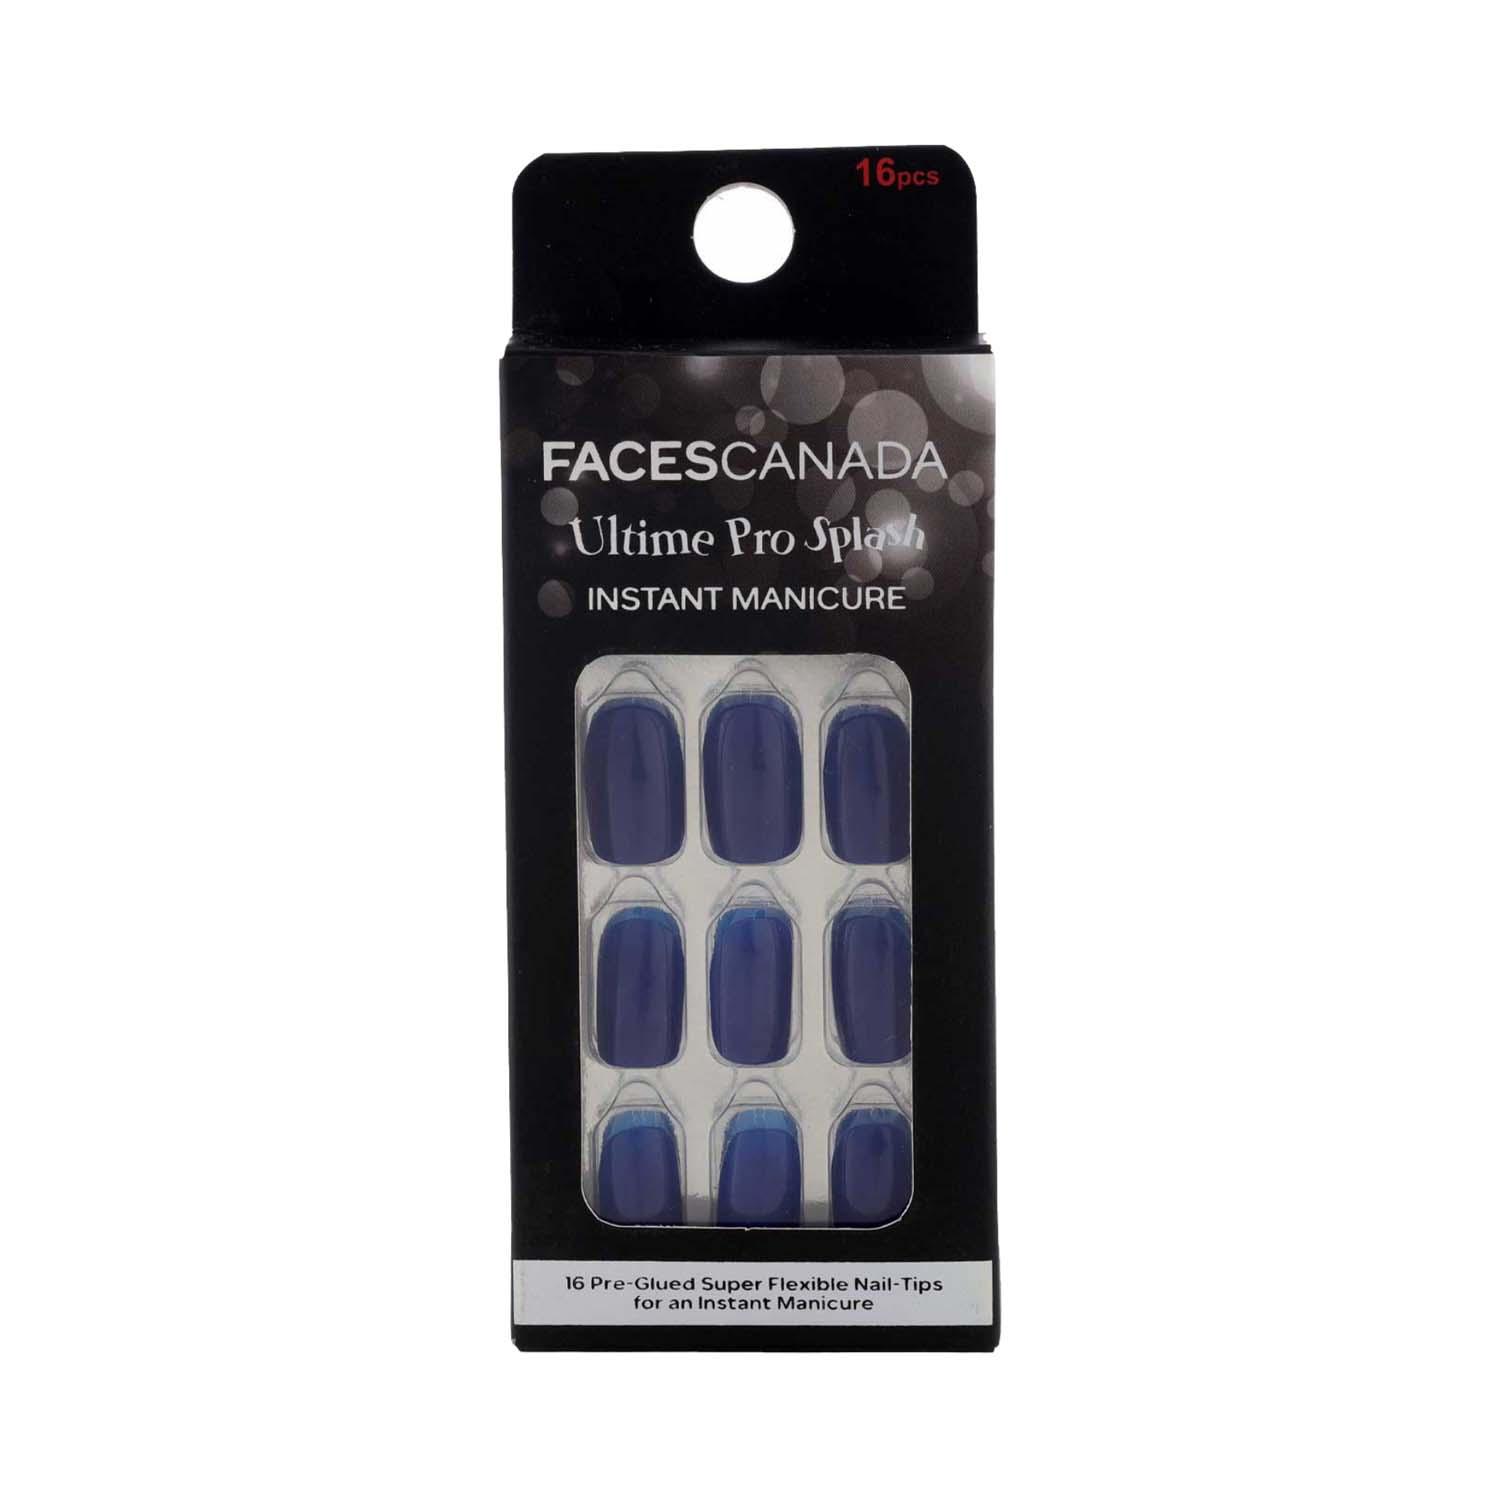 Faces Canada | Faces Canada Ultime Pro Splash Instant Manicure Nail Extension - Midnight (16 pcs)